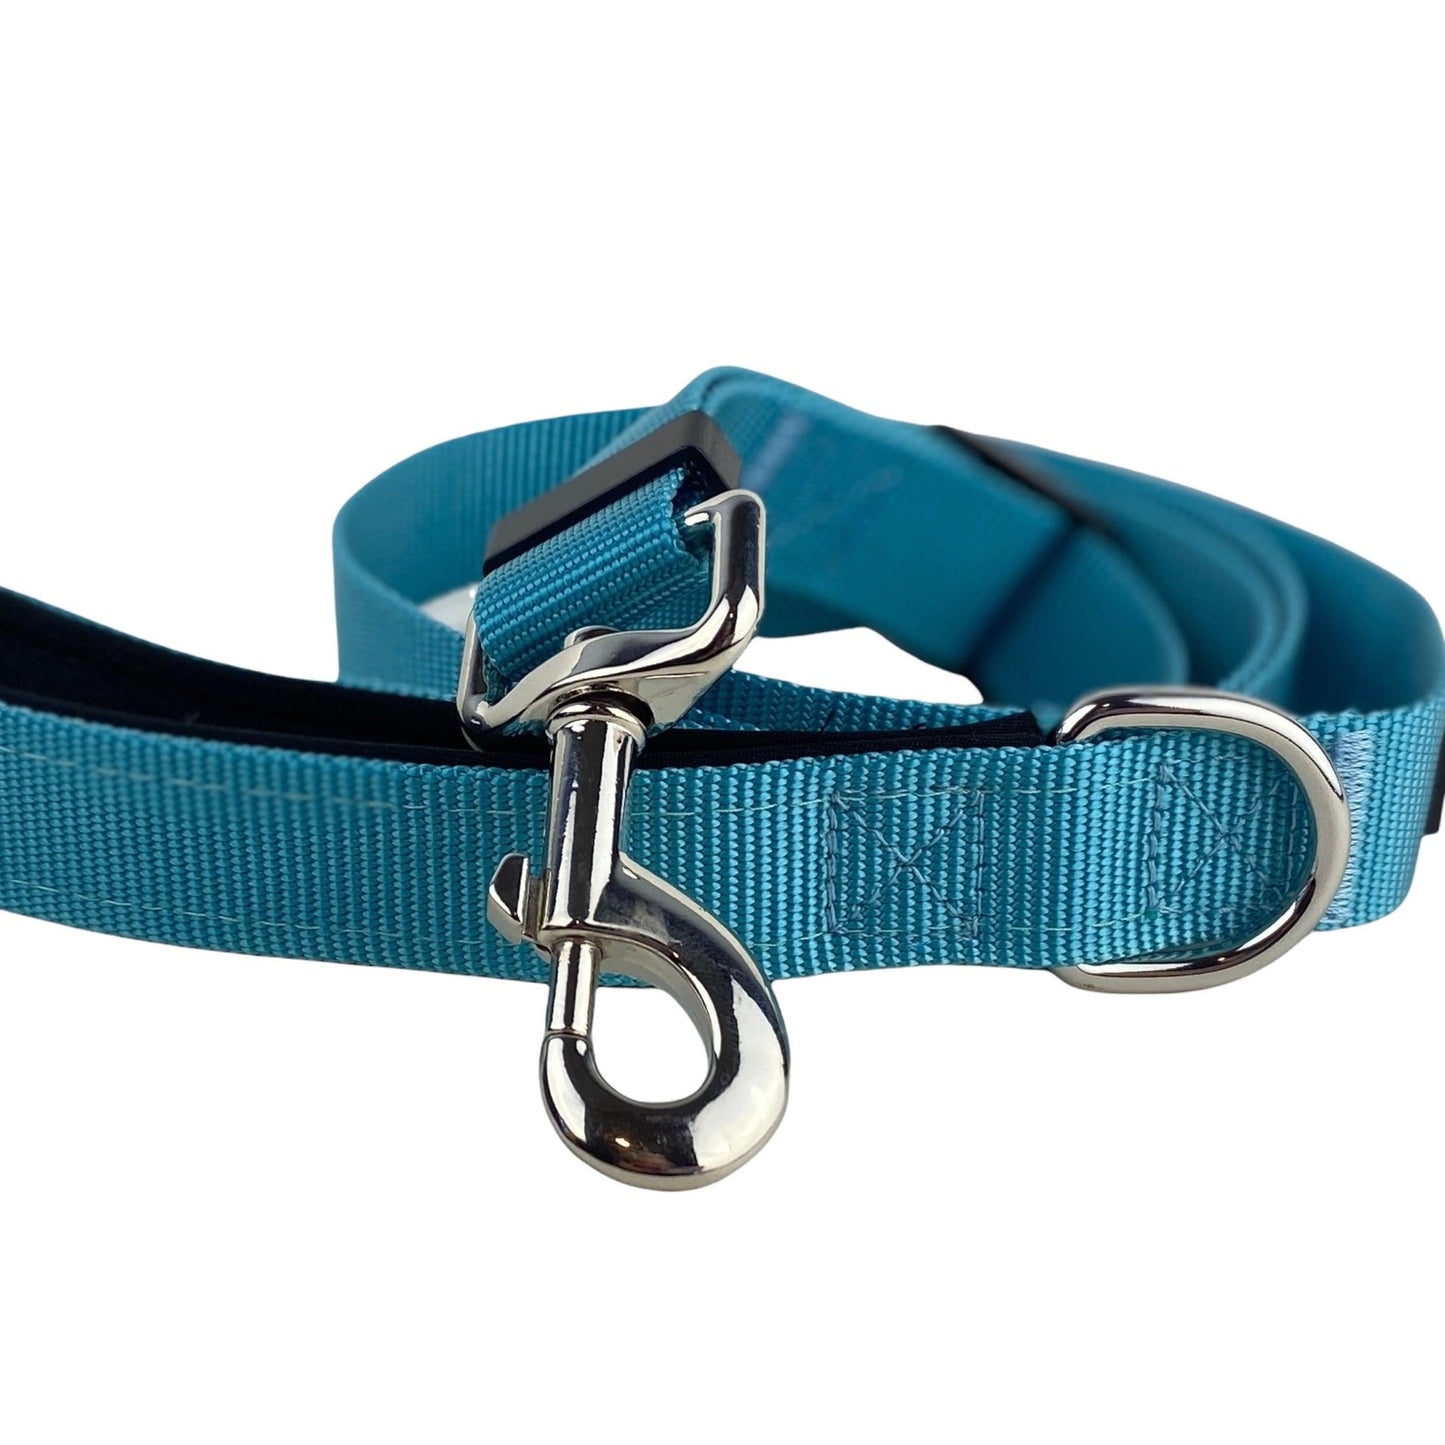 photo of a teal dog leash with a d-ring at the handle by fearless pet